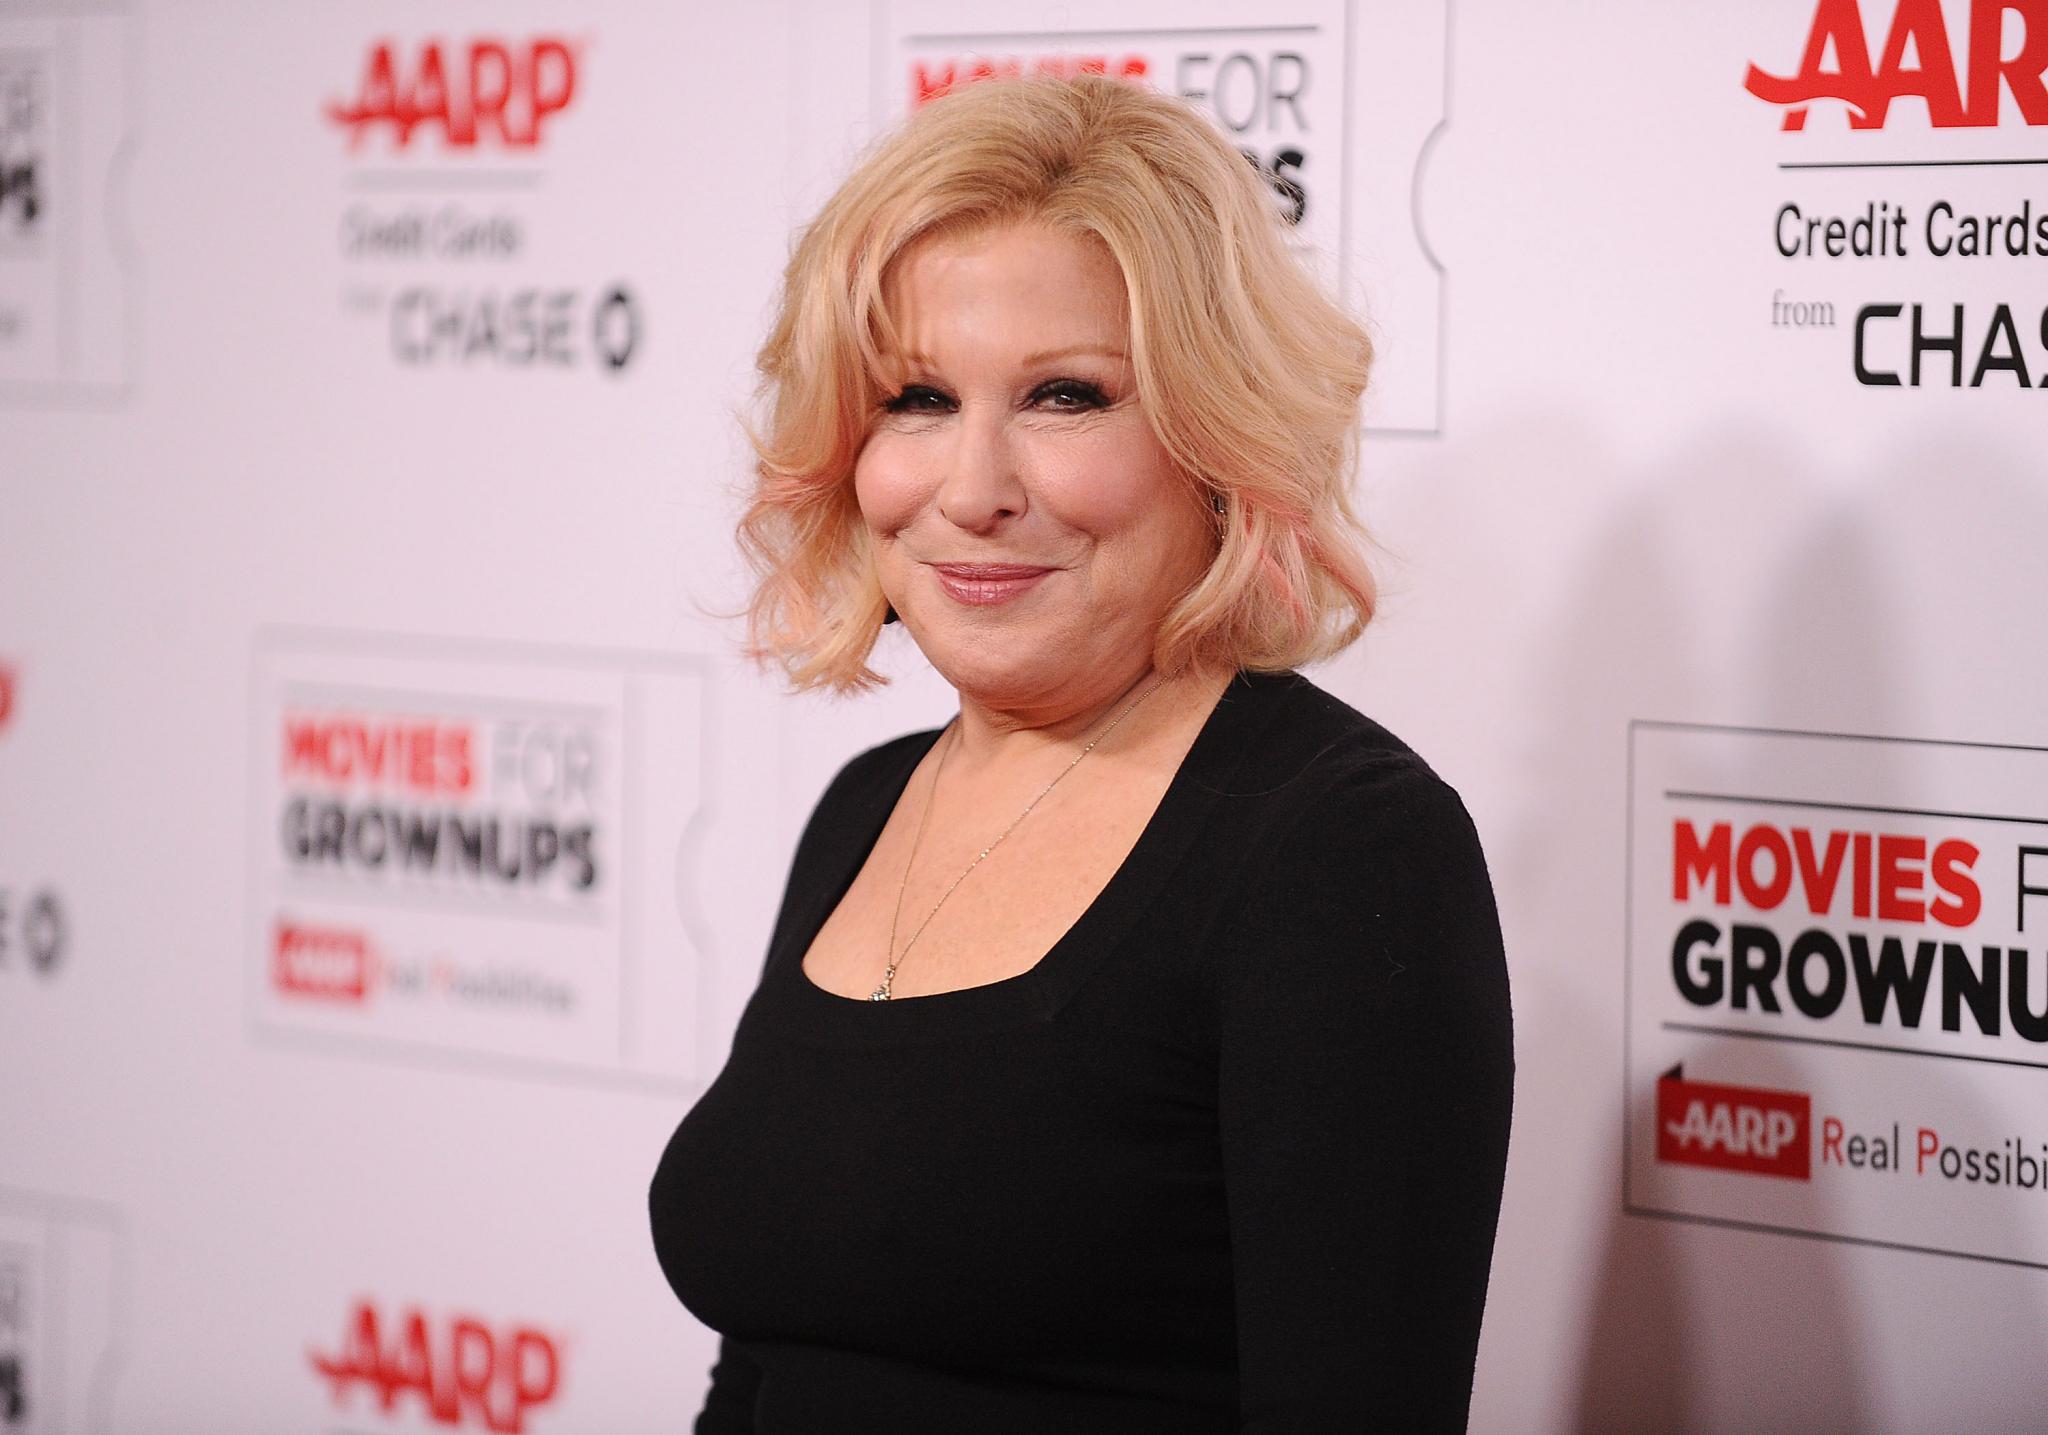 Bette Midler Apologizes For Calling Women 'The N-Word Of The World'